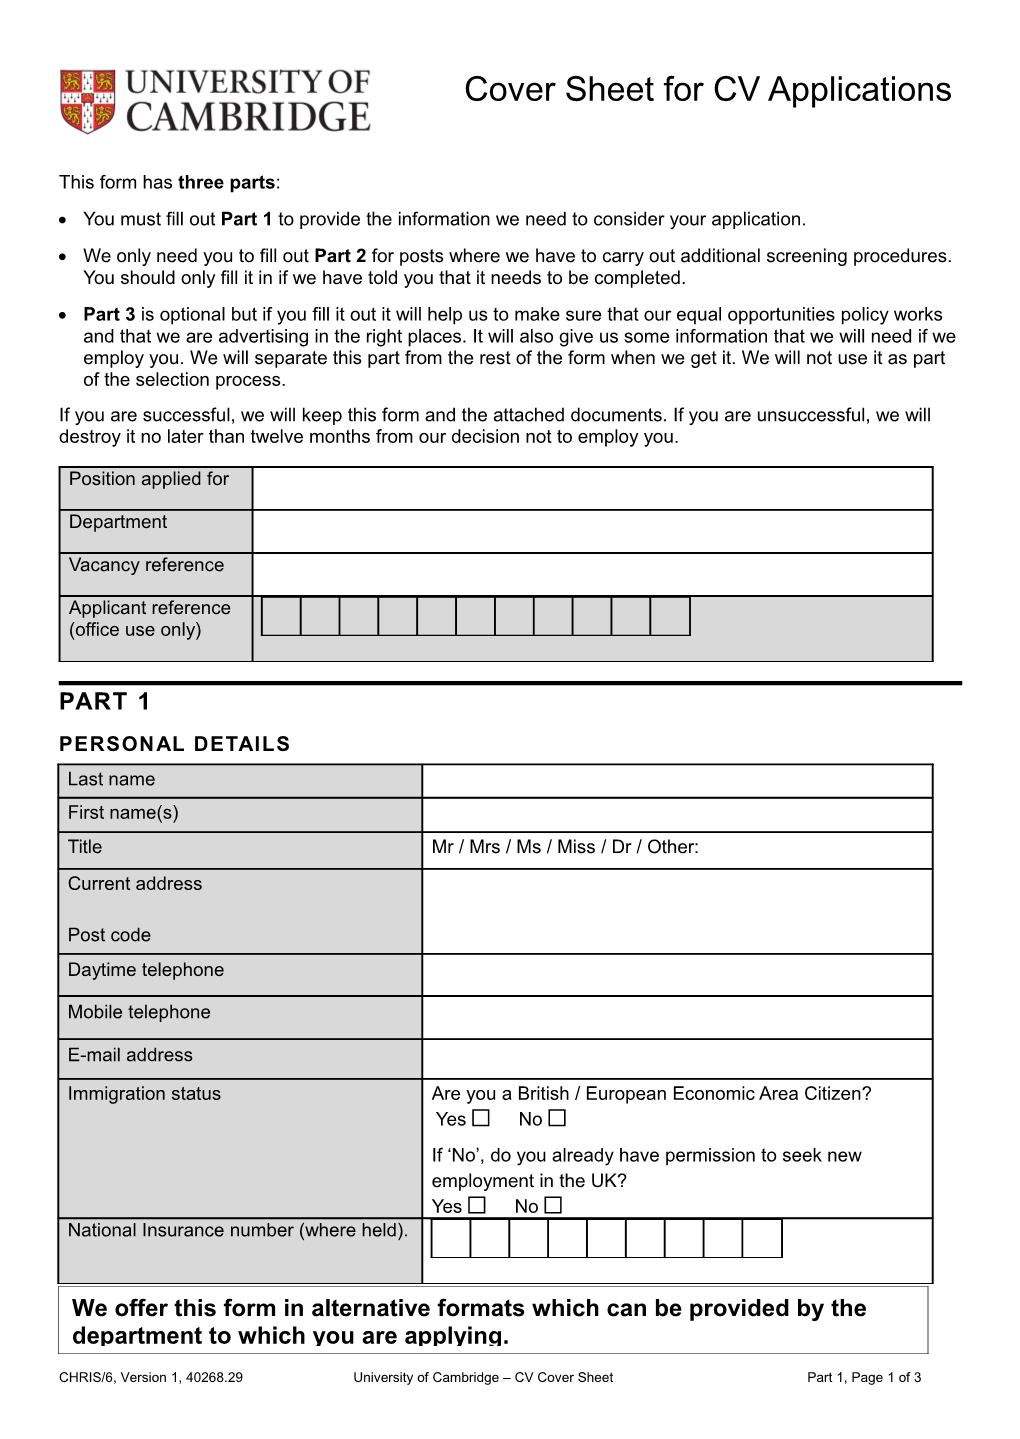 Form CHRIS/5: Application for Employment